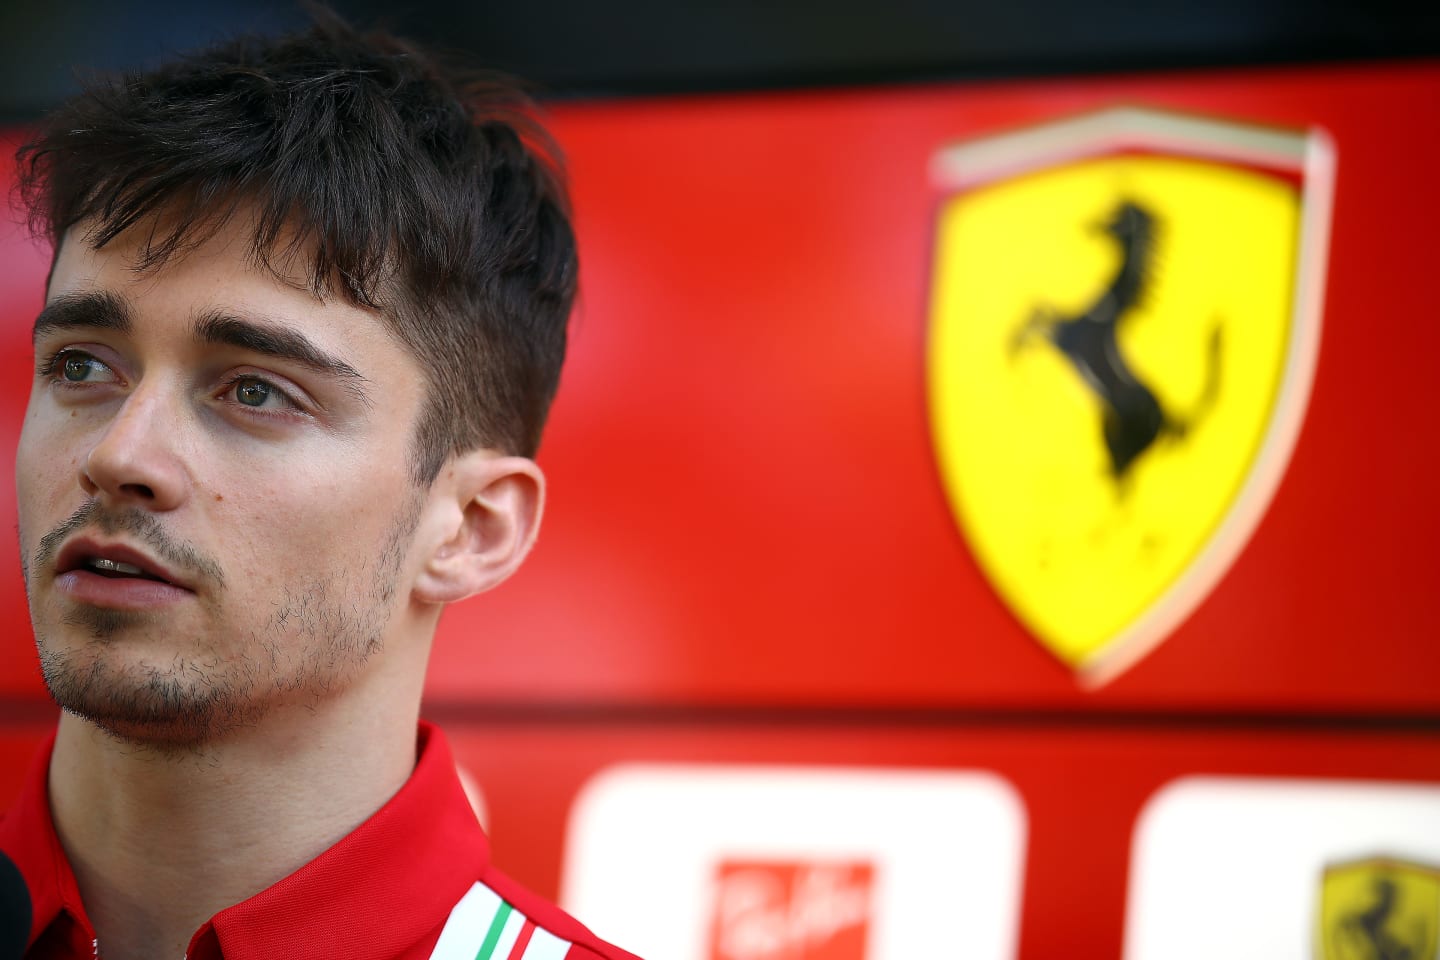 MELBOURNE, AUSTRALIA - MARCH 12: Charles Leclerc of Monaco and Ferrari looks on in the Paddock